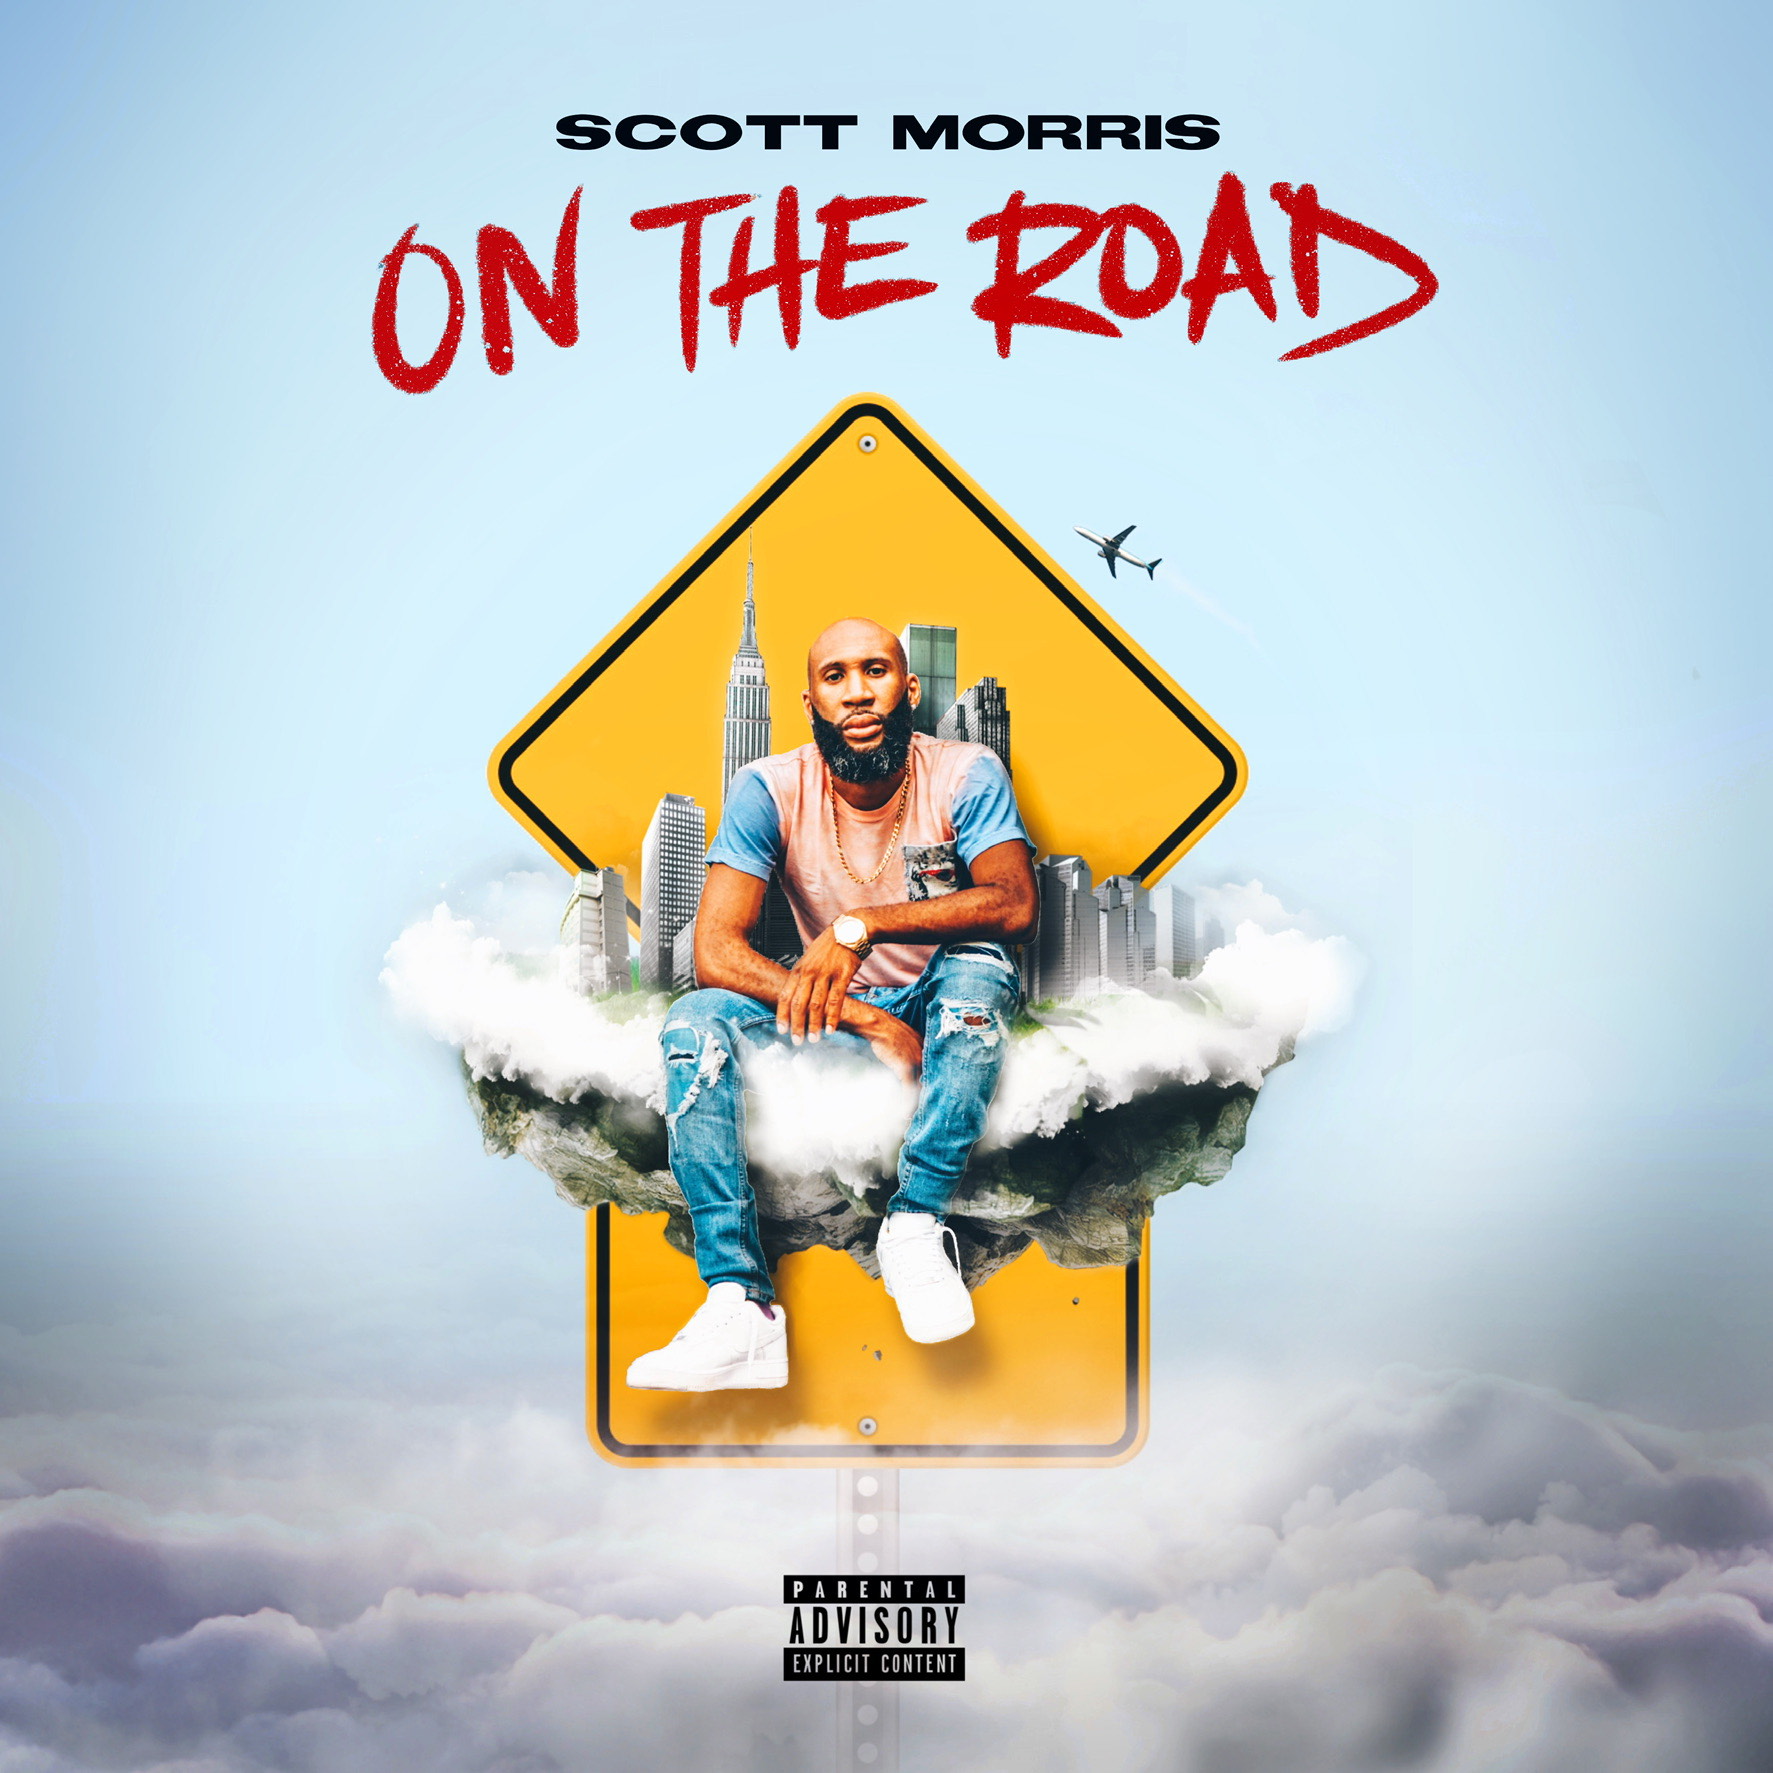 Scott Morris is putting his artistry in drive with his new single “On The Road”